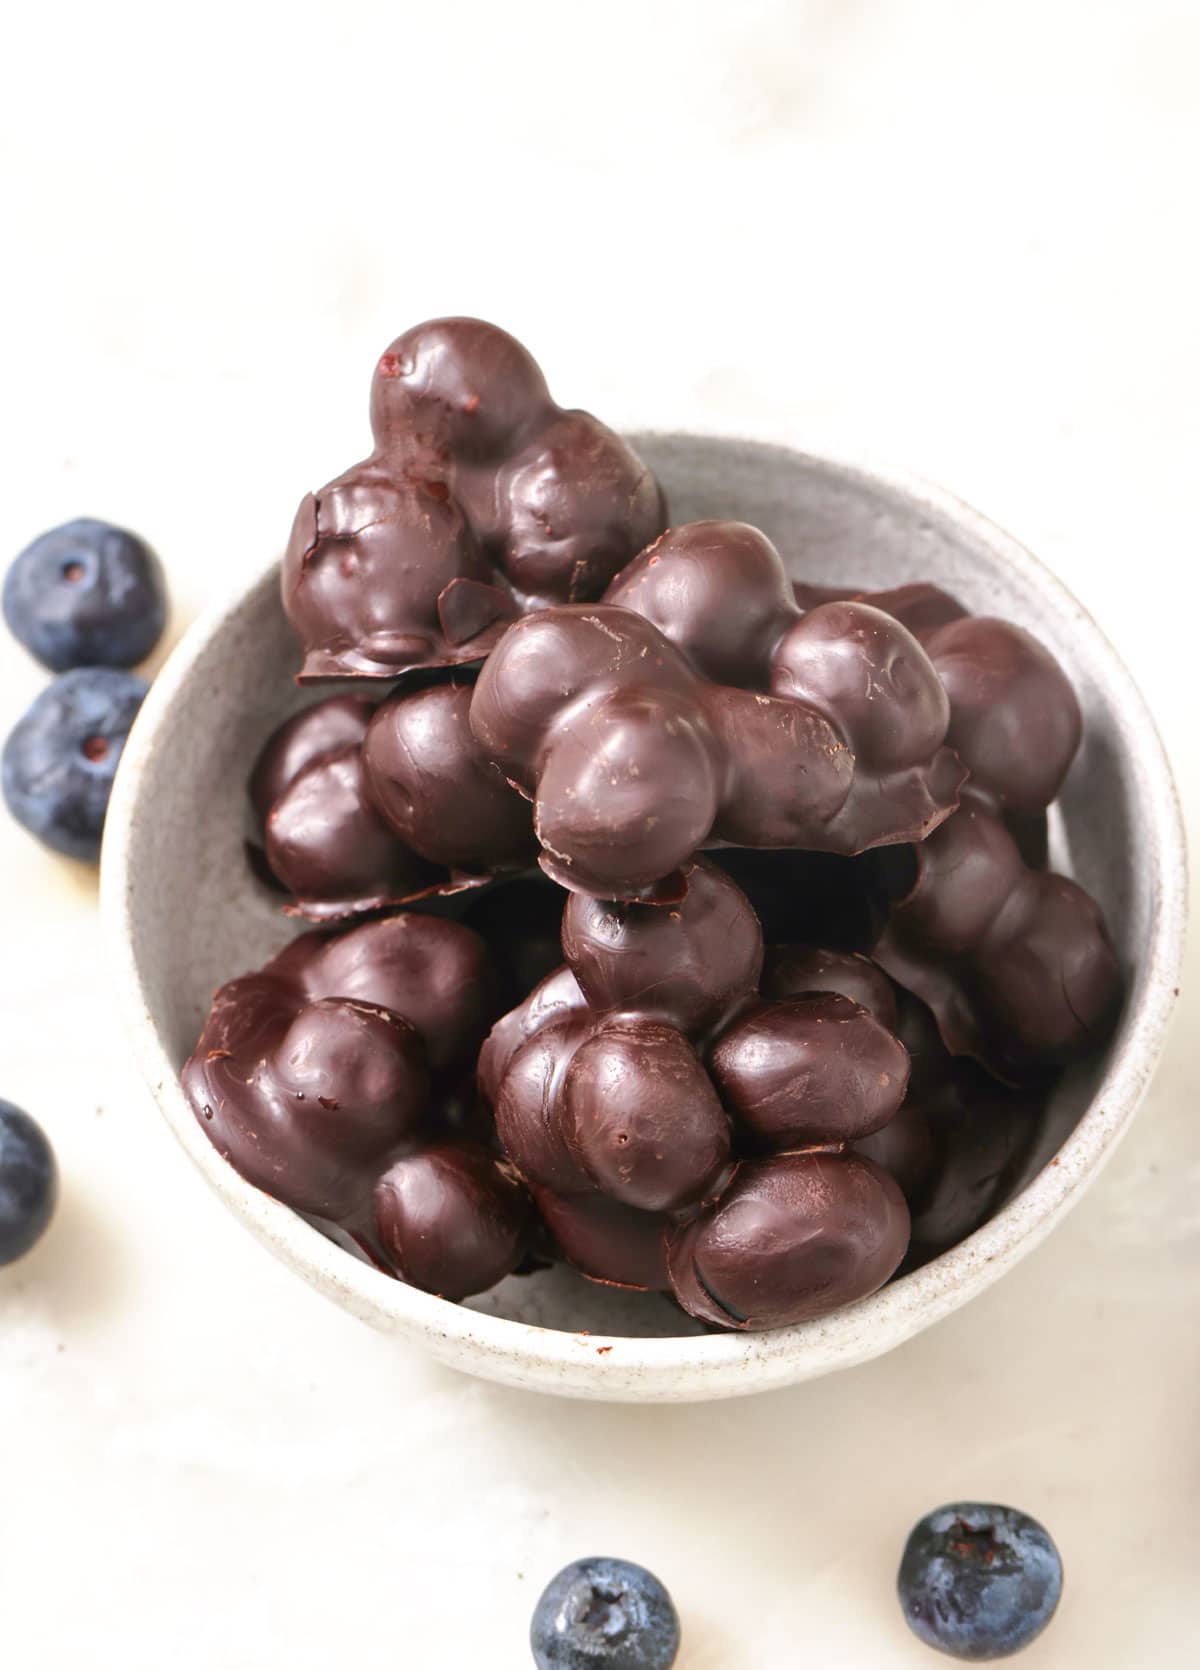 A bowl with chocolate covered blueberry clusters surrounded by fresh blueberries.